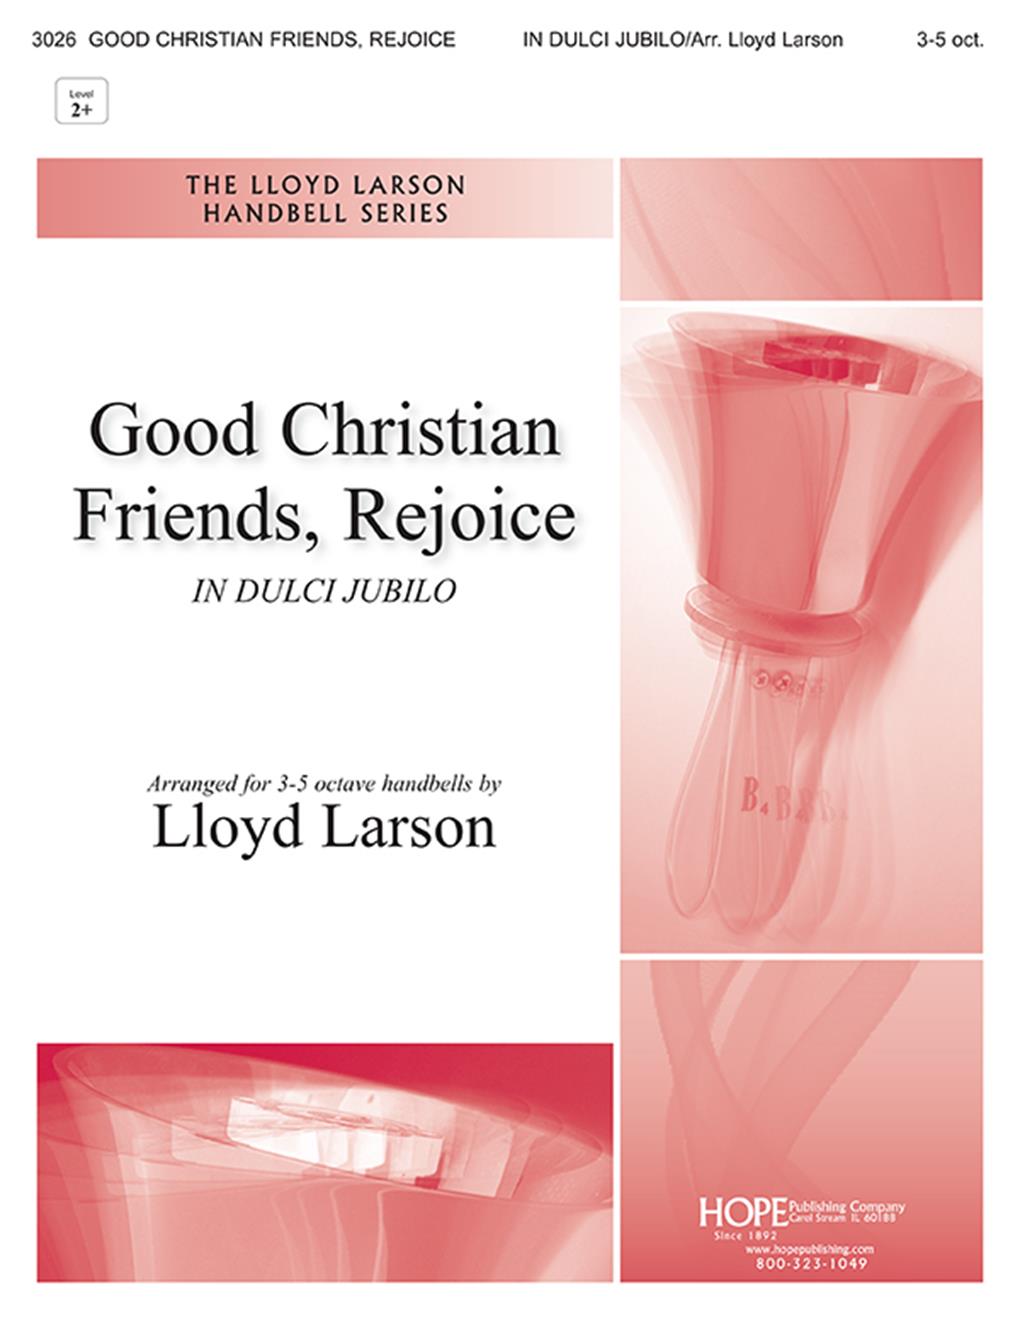 Good Christian Friends Rejoice -3-5 oct. Cover Image